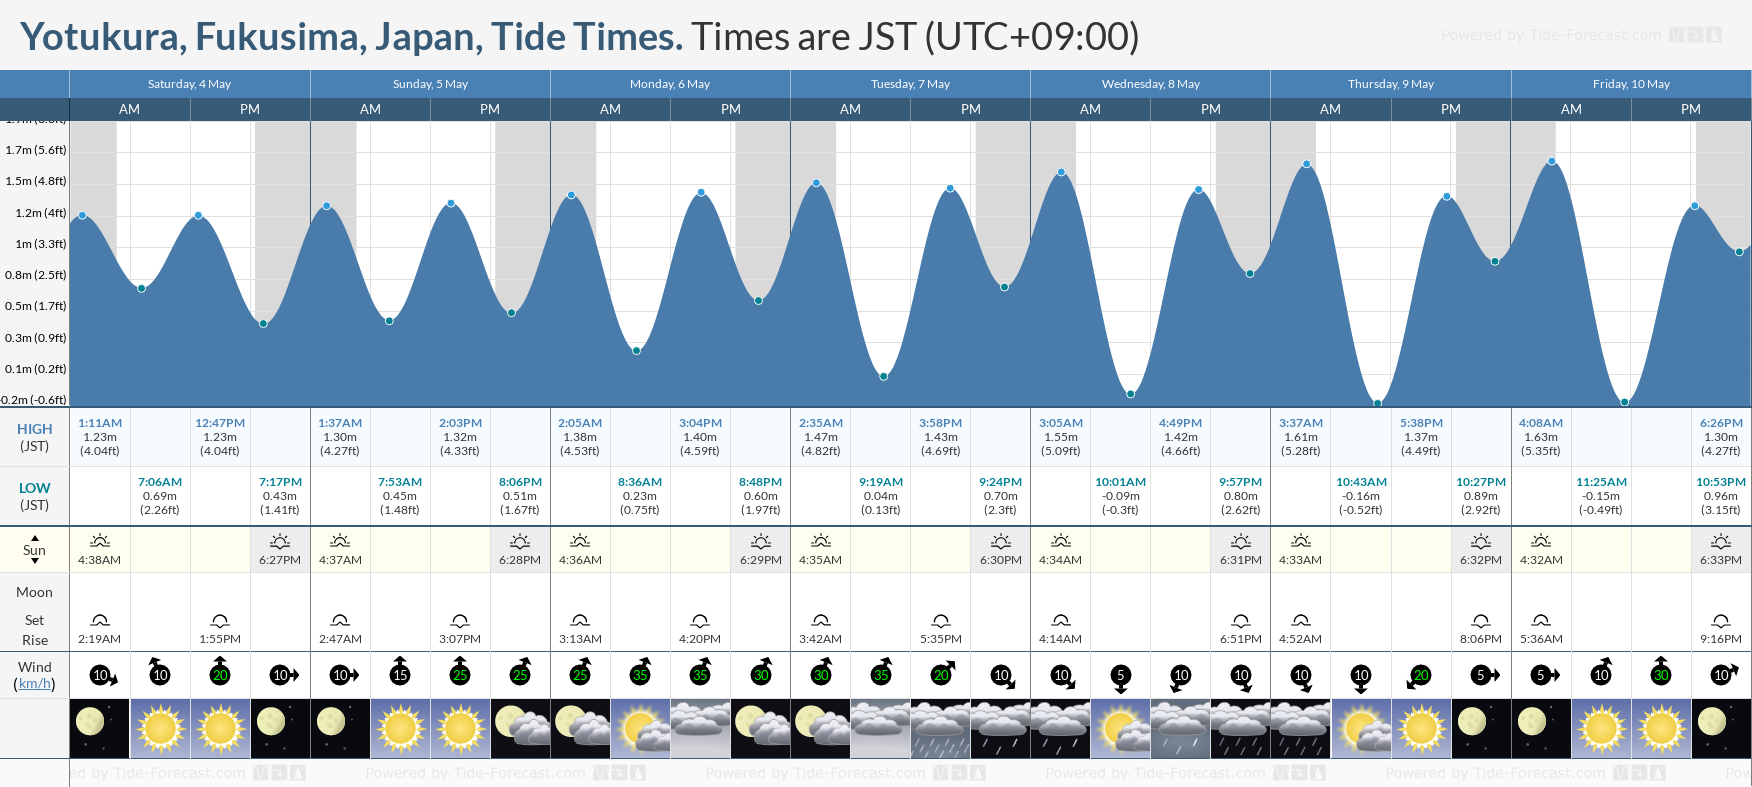 Yotukura, Fukusima, Japan Tide Chart including high and low tide tide times for the next 7 days